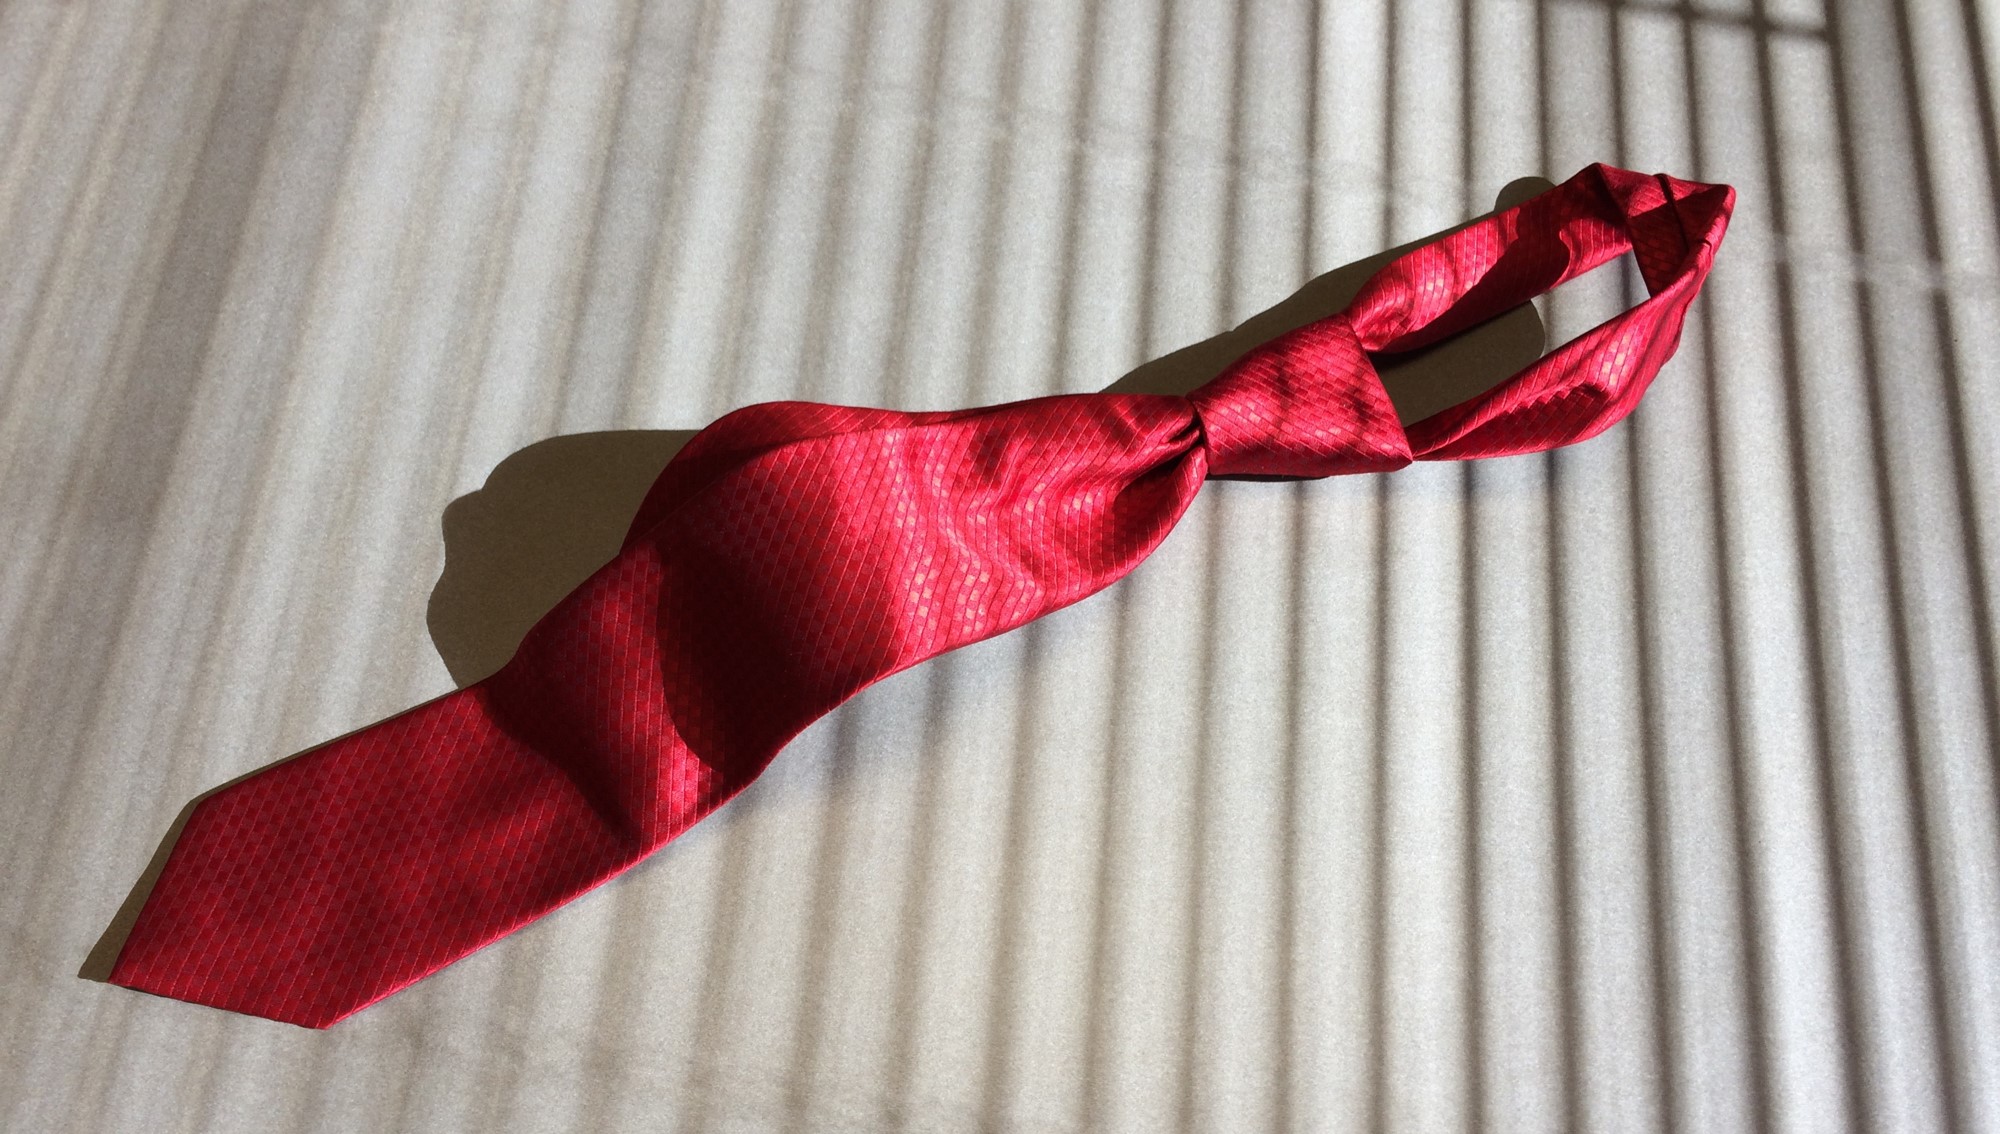 HoG Takes the National Hemophilia Foundation Red Tie Challenge